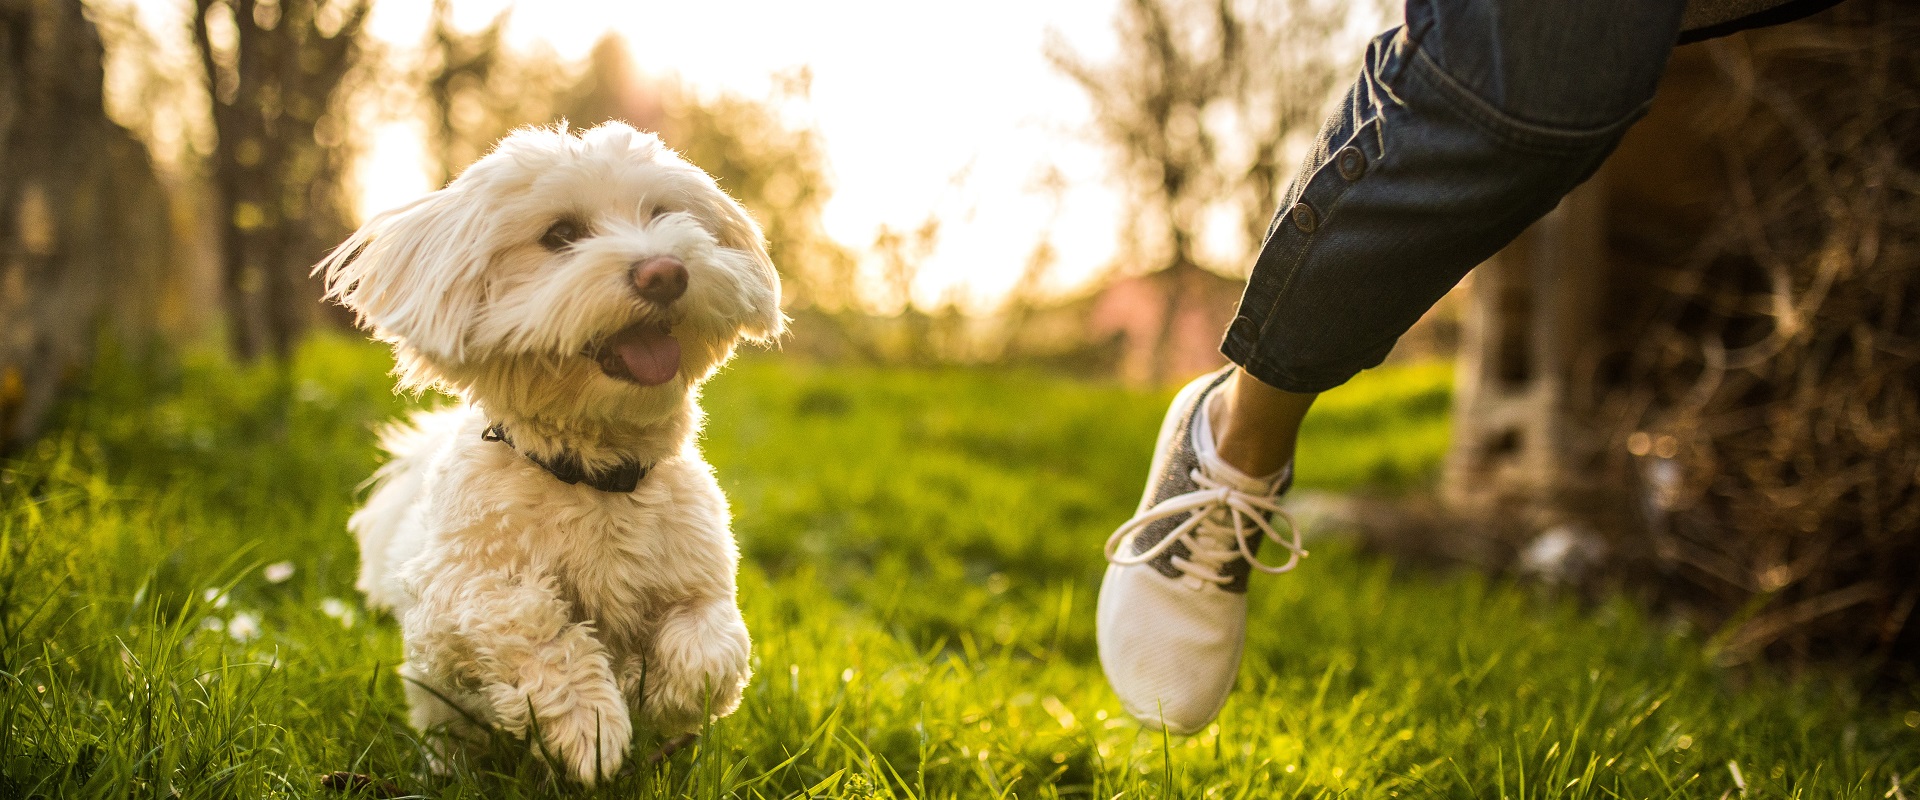 Take your pampered pooch on an invigorating walk through the city.